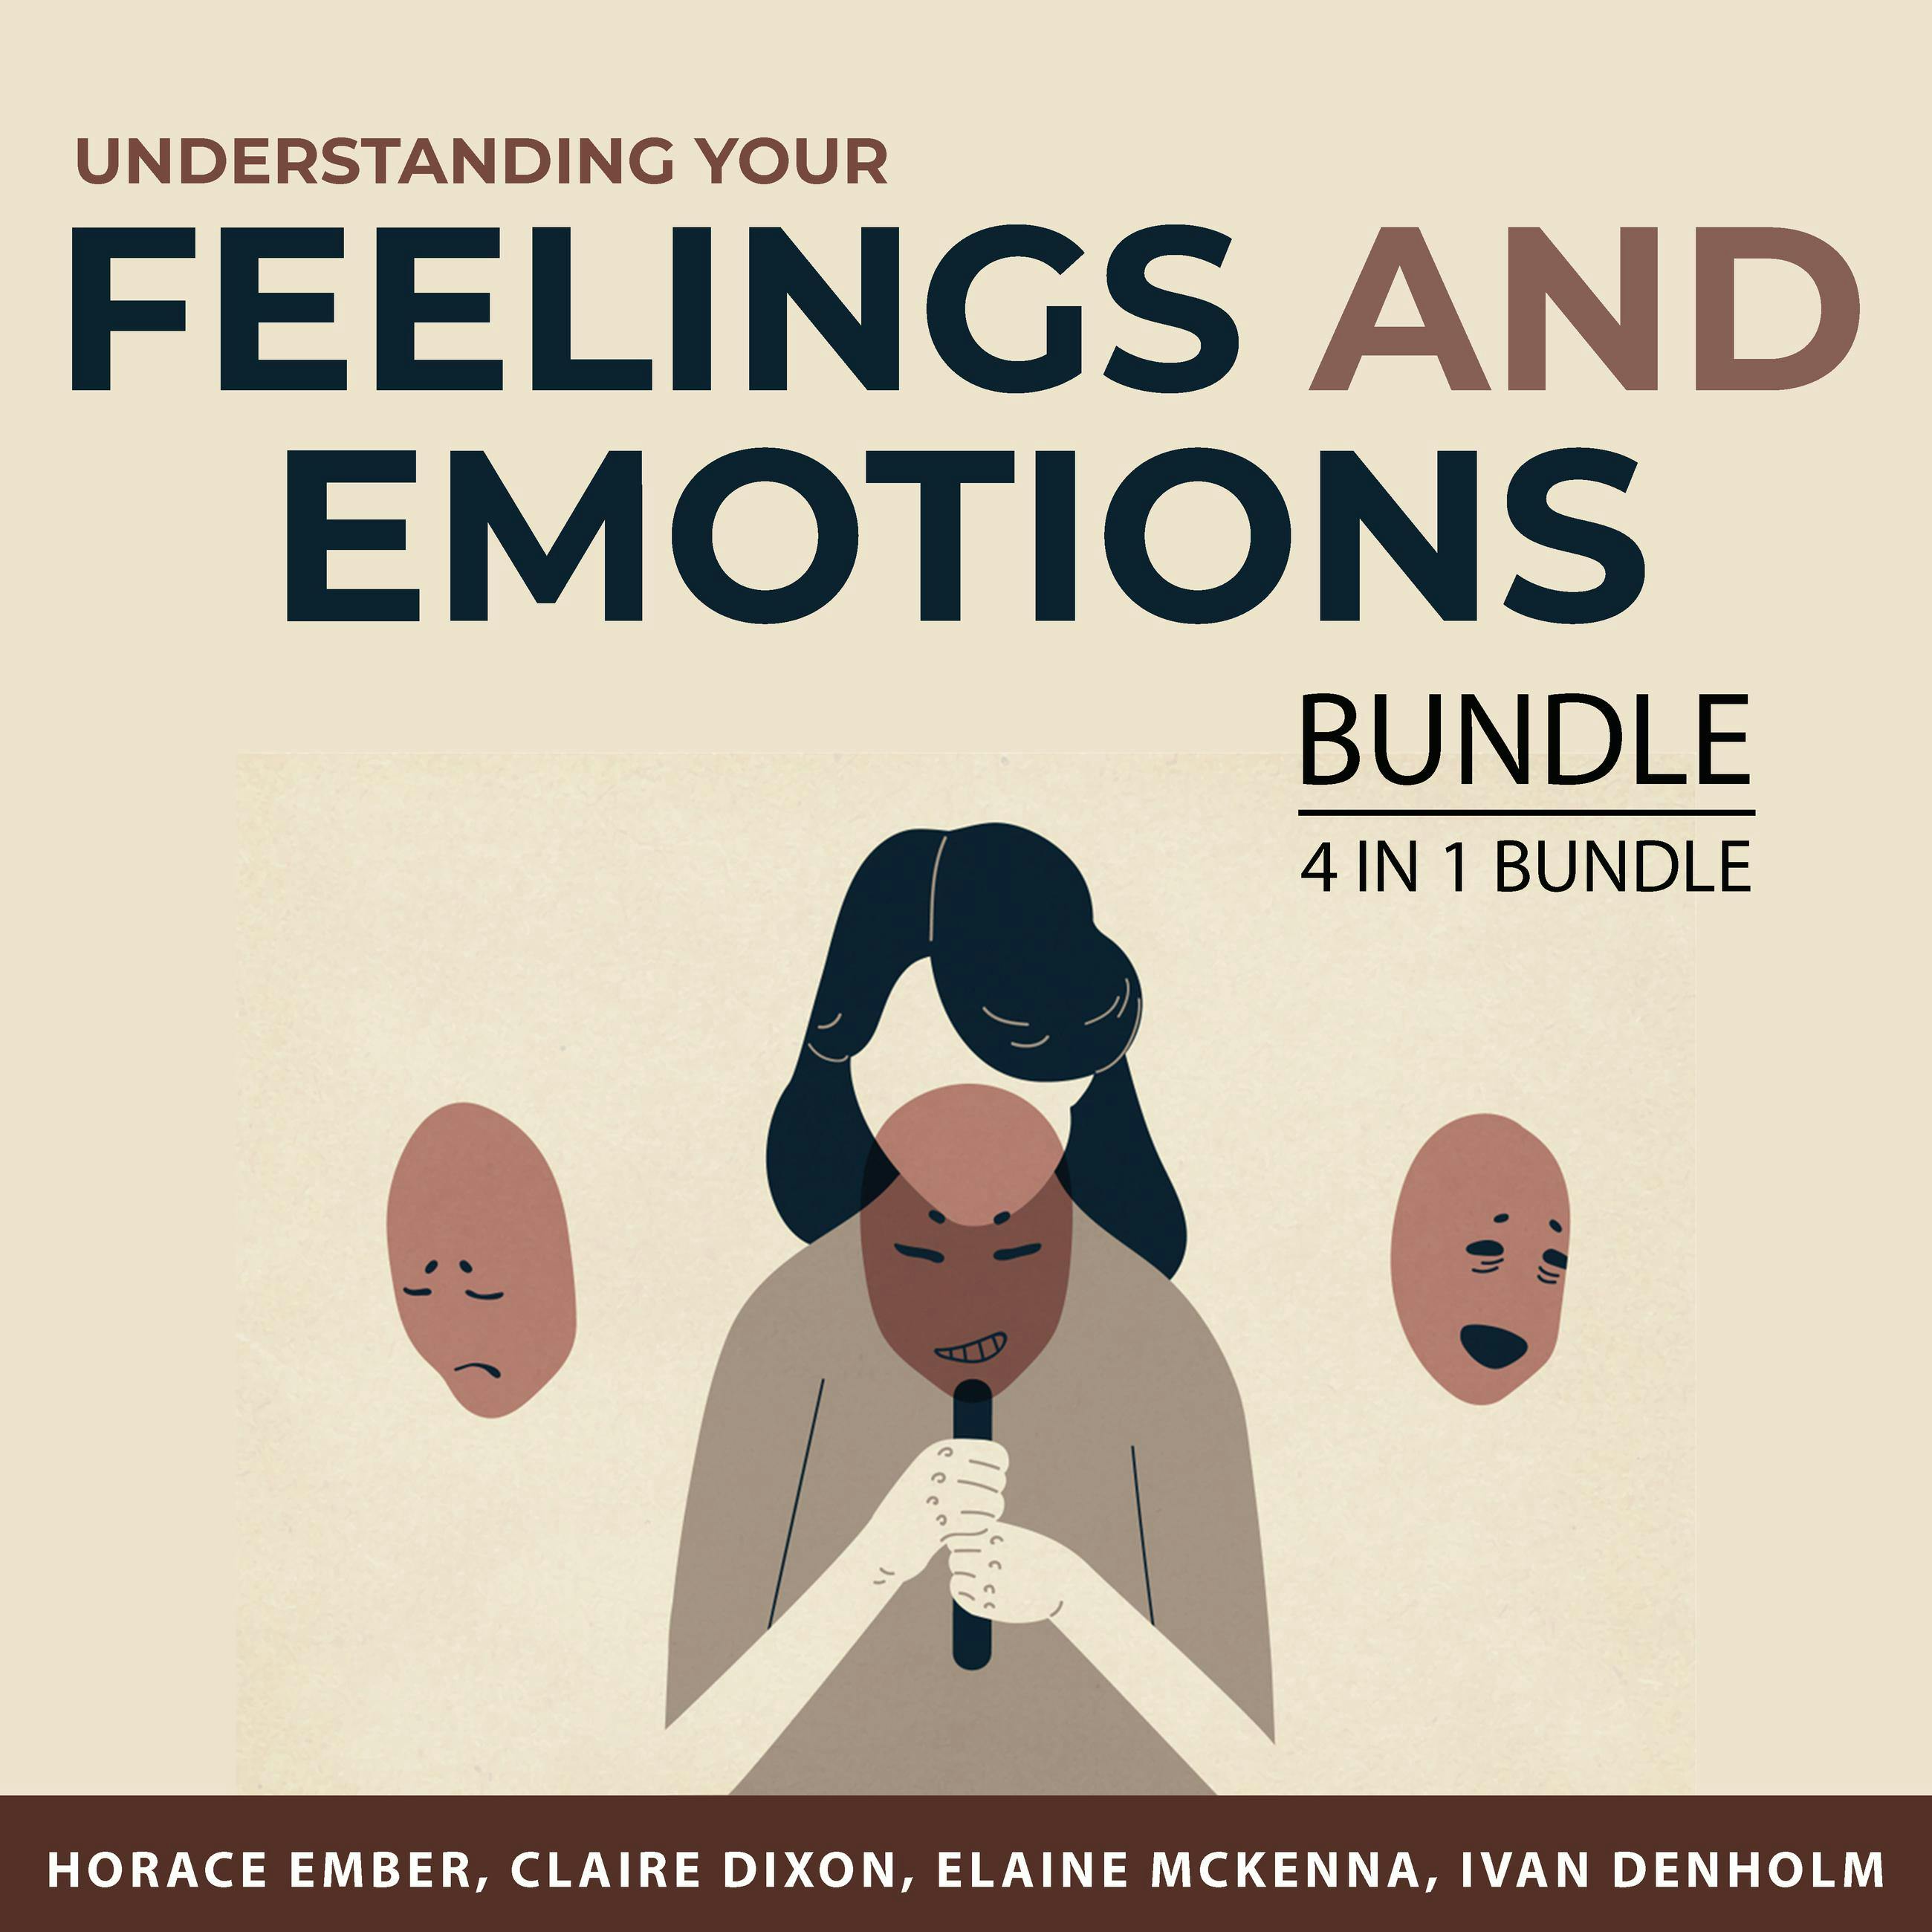 Understanding Your Feelings and Emotions Bundle, 4 in 1 Bundle: Say Goodbye to Your Anger, How to Feel Good, Emotional Intelligence Mastery, and Master Your Feelings - Claire Dixon, Elaine McKenna, Horace Ember, Ivan Denholm